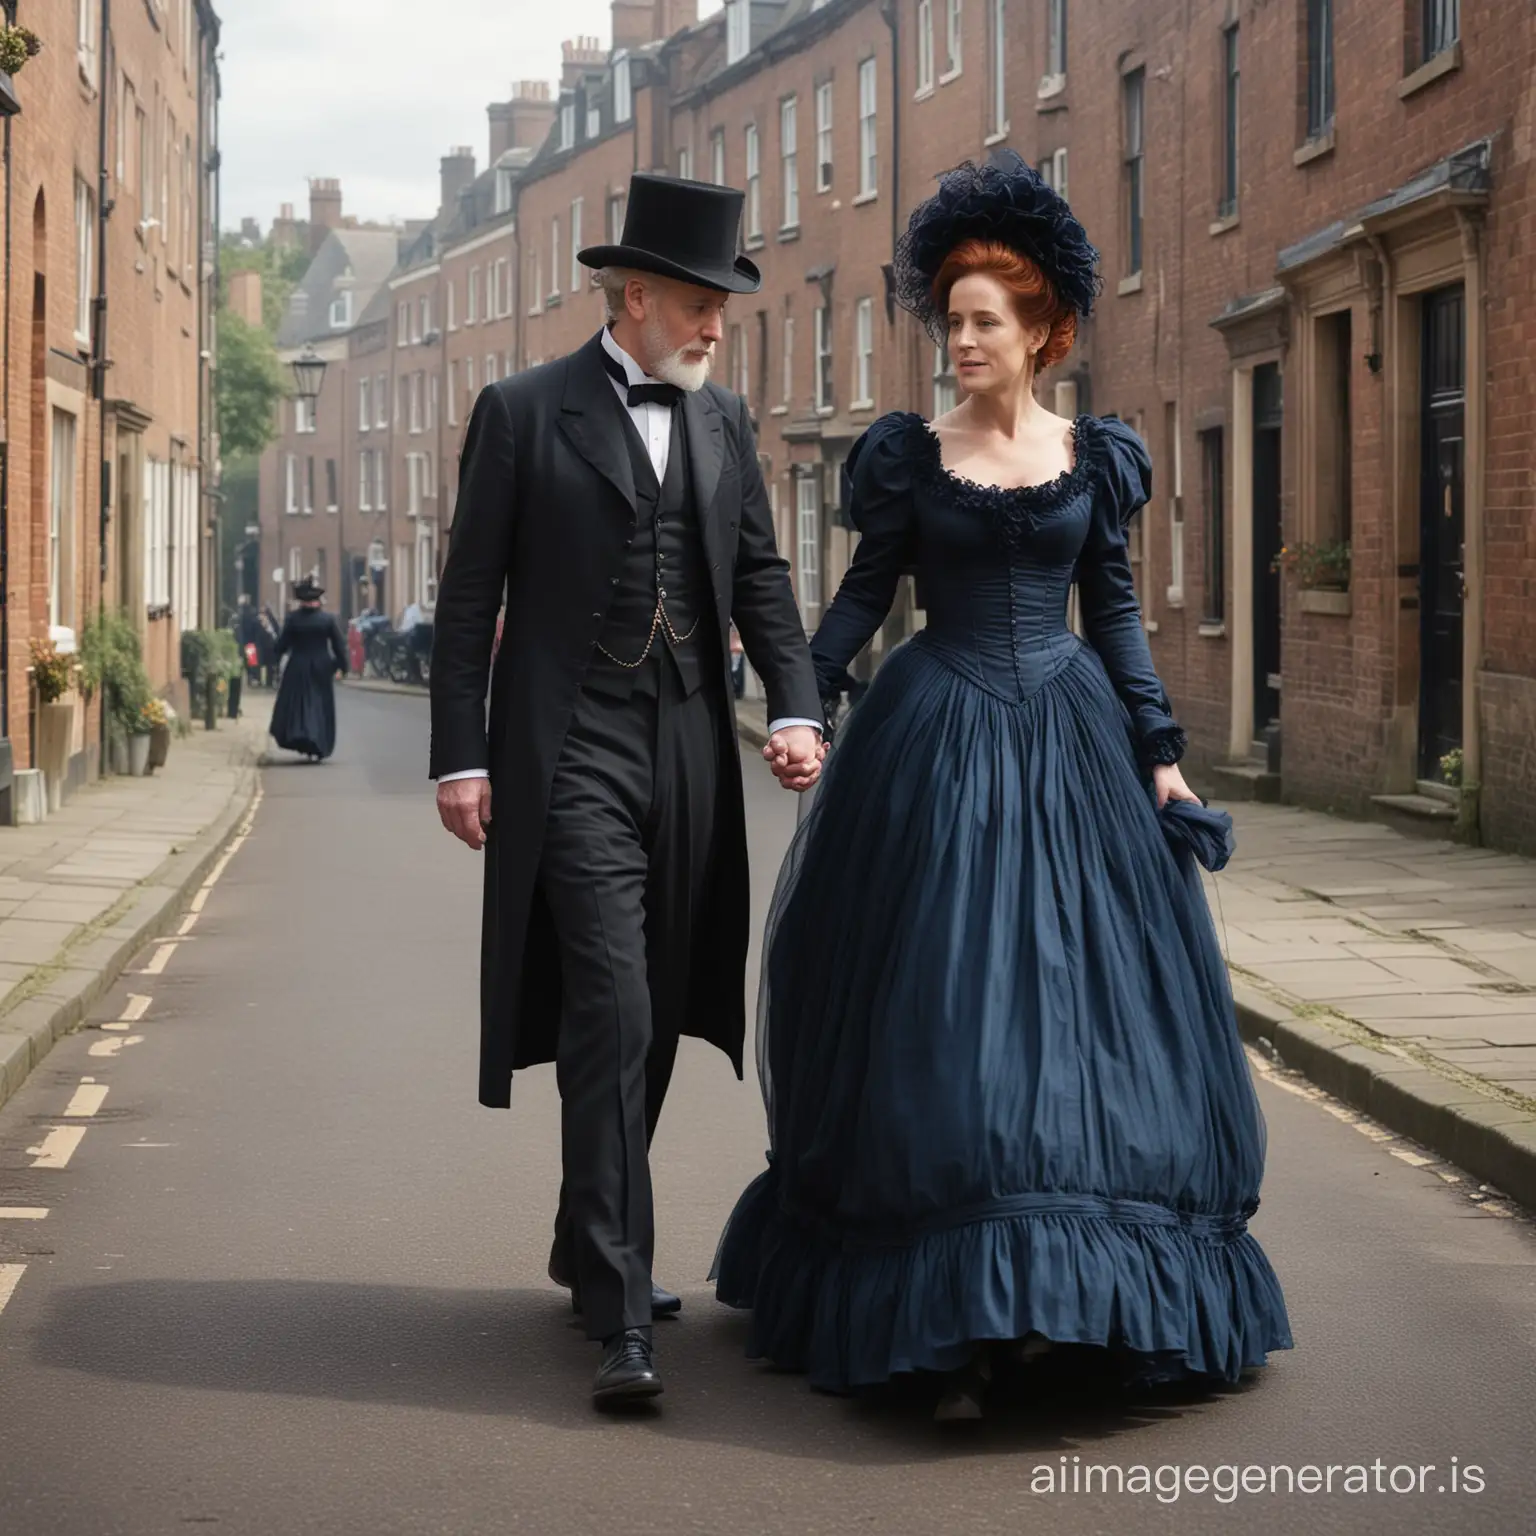 Victorian-Newlyweds-Elegant-RedHaired-Bride-and-Dapper-Groom-on-Historic-Street